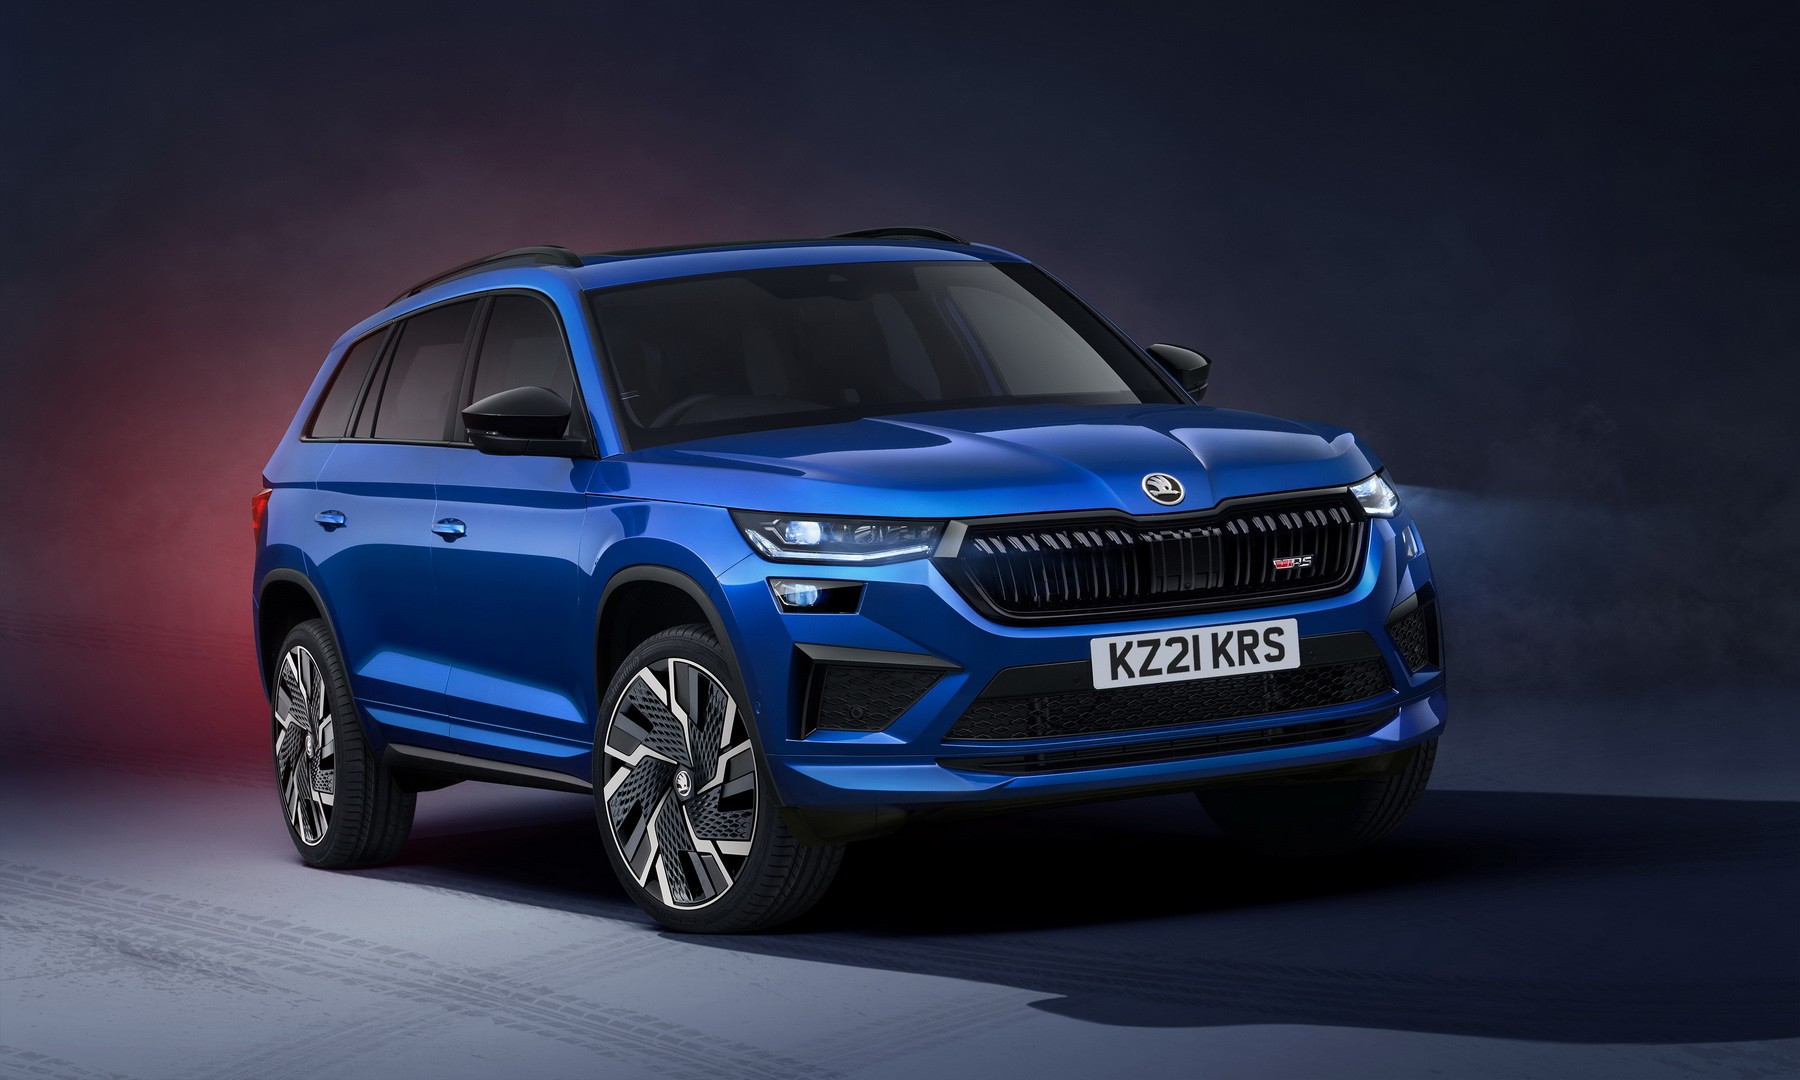 https://s1.cdn.autoevolution.com/images/news/gallery/updated-2021-skoda-kodiaq-rs-now-available-in-the-uk-from-44635-otr_1.jpg